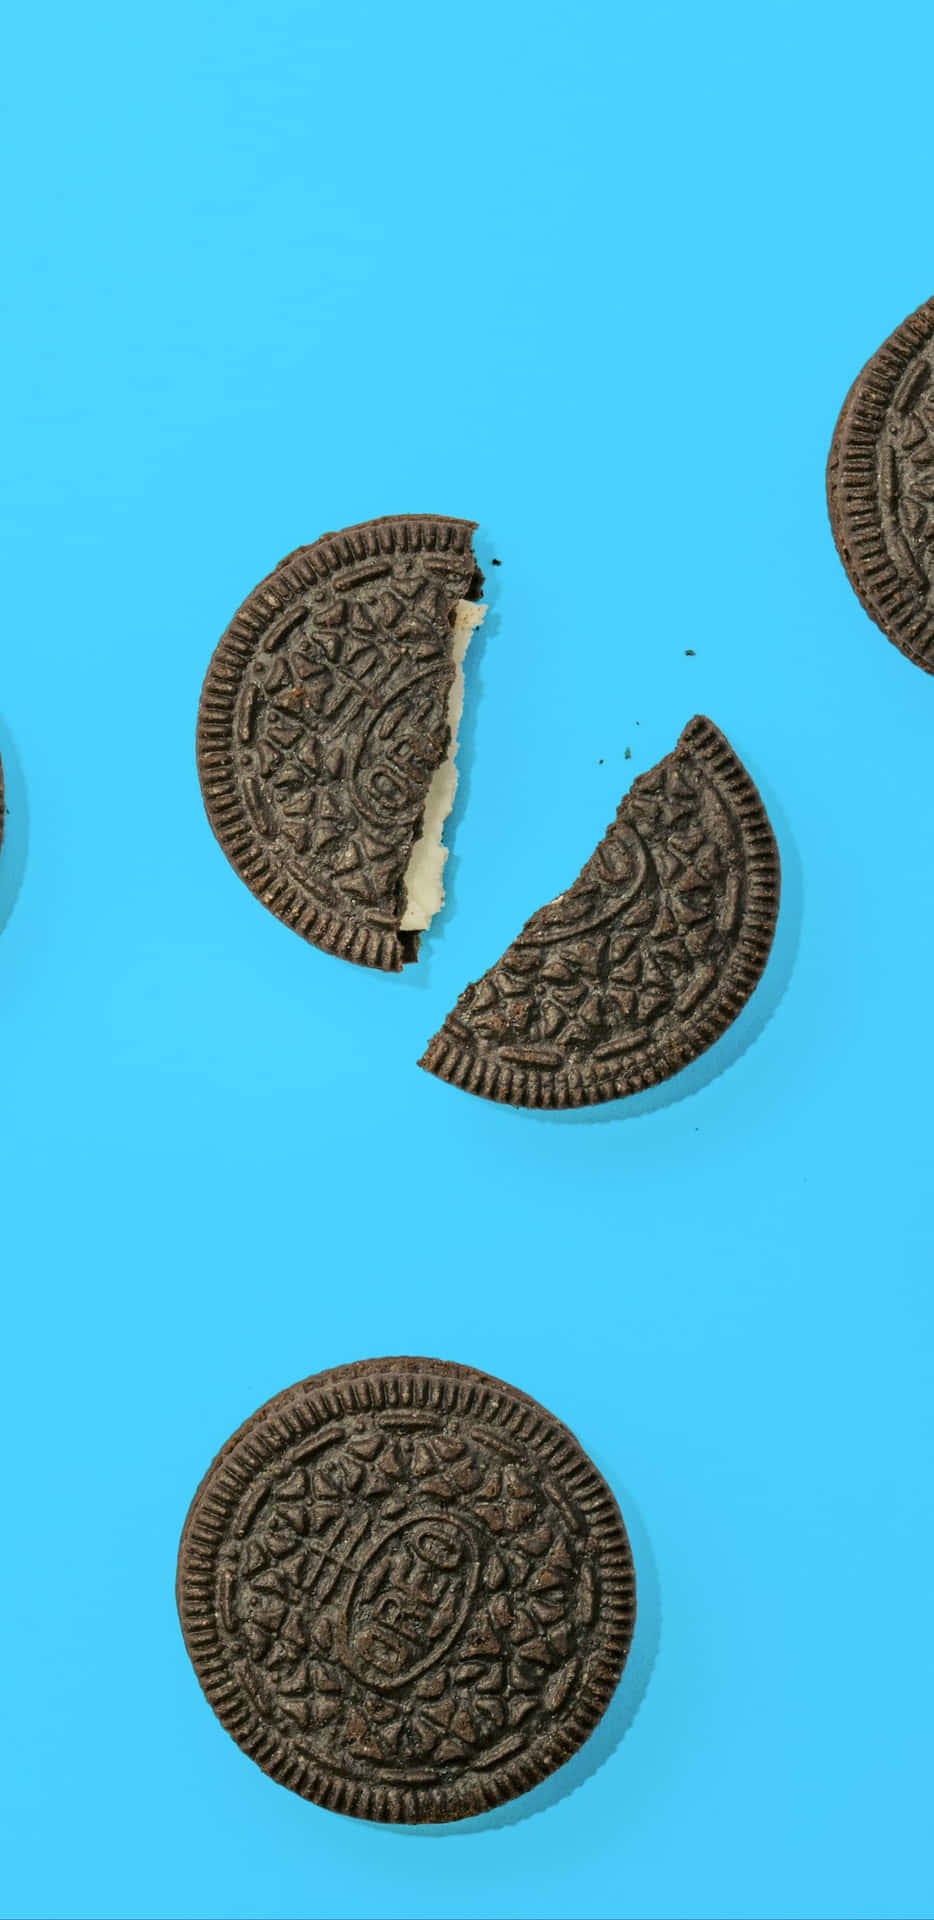 A group of Oreo cookies are arranged in a circle on a blue background. The cookies are placed in various positions, with some being partially cut or - Oreo